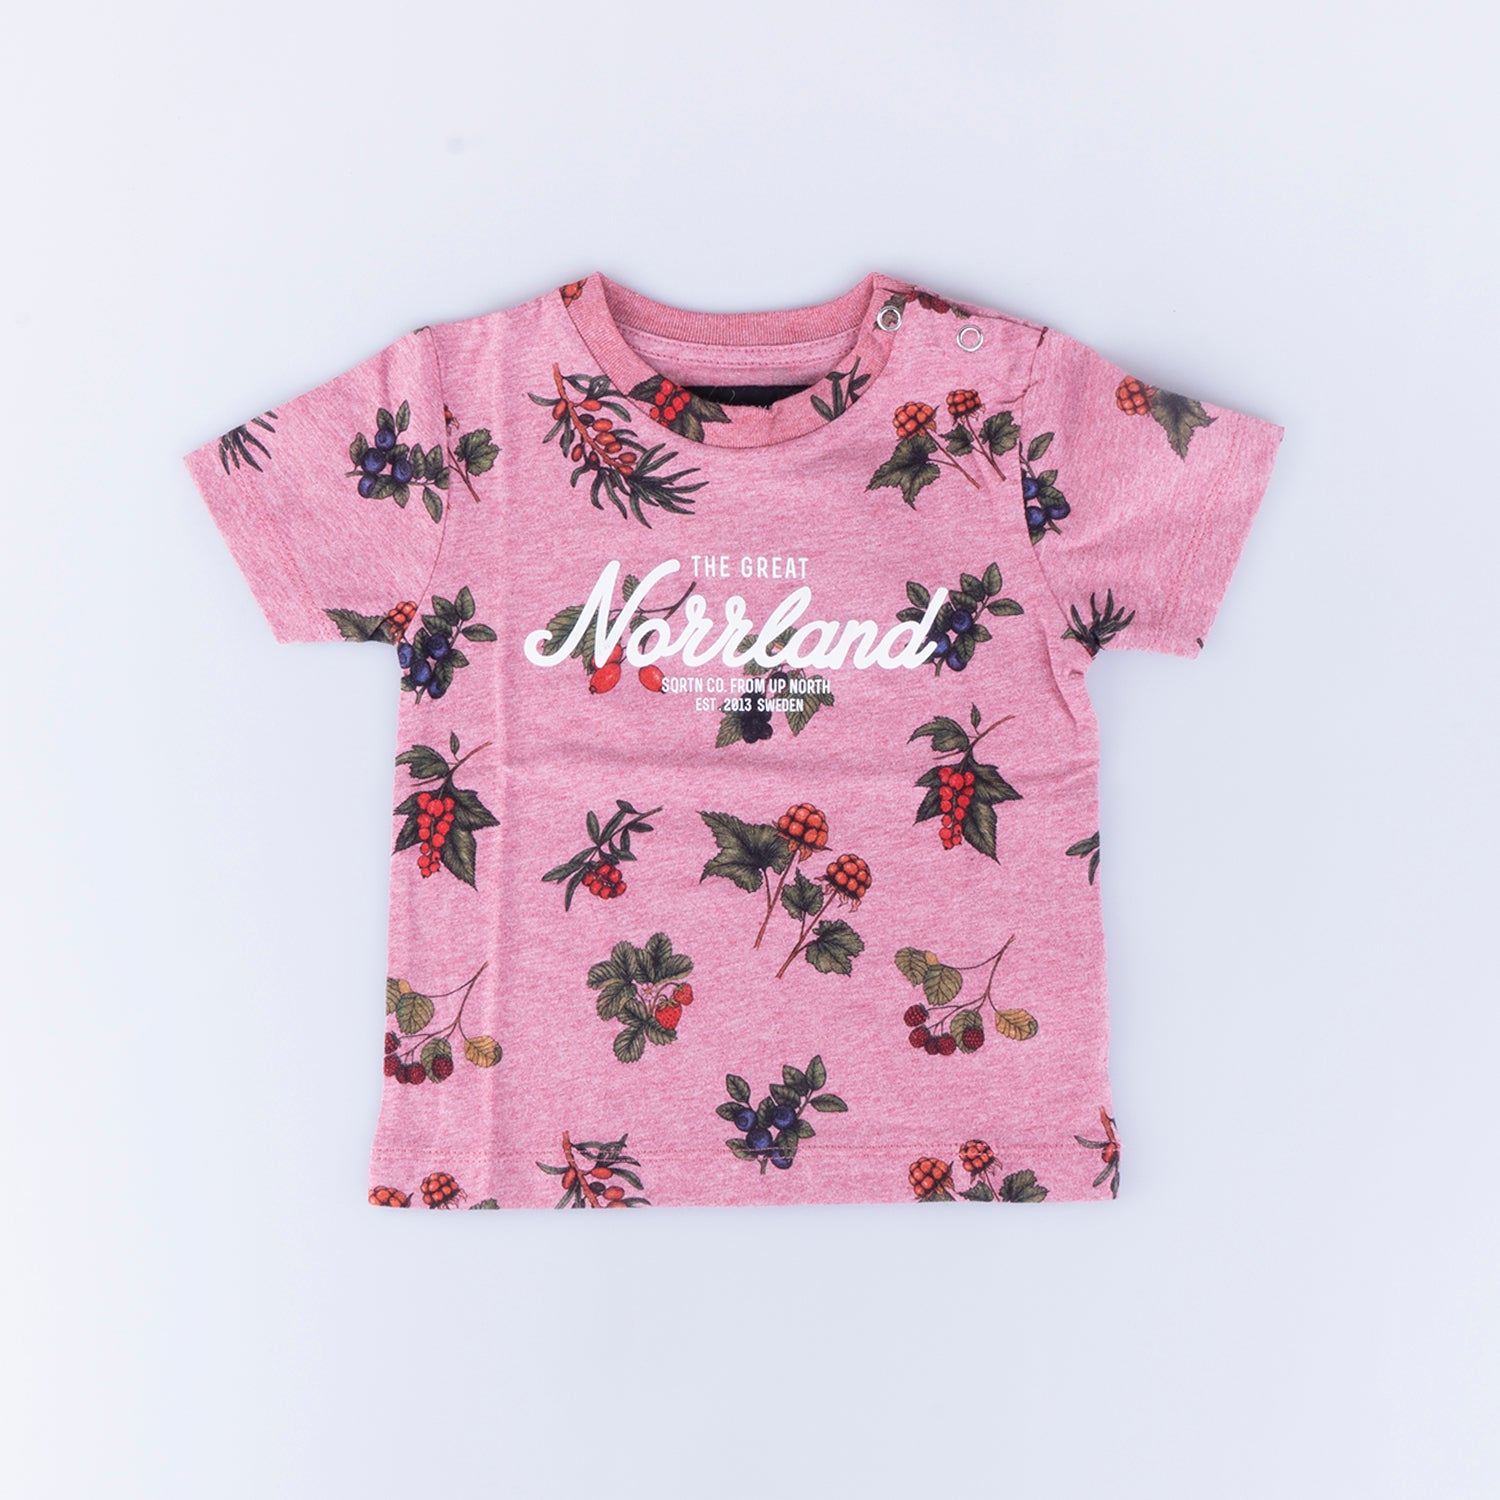 GREAT NORRLAND KIDS T-SHIRT - BERRY PINK